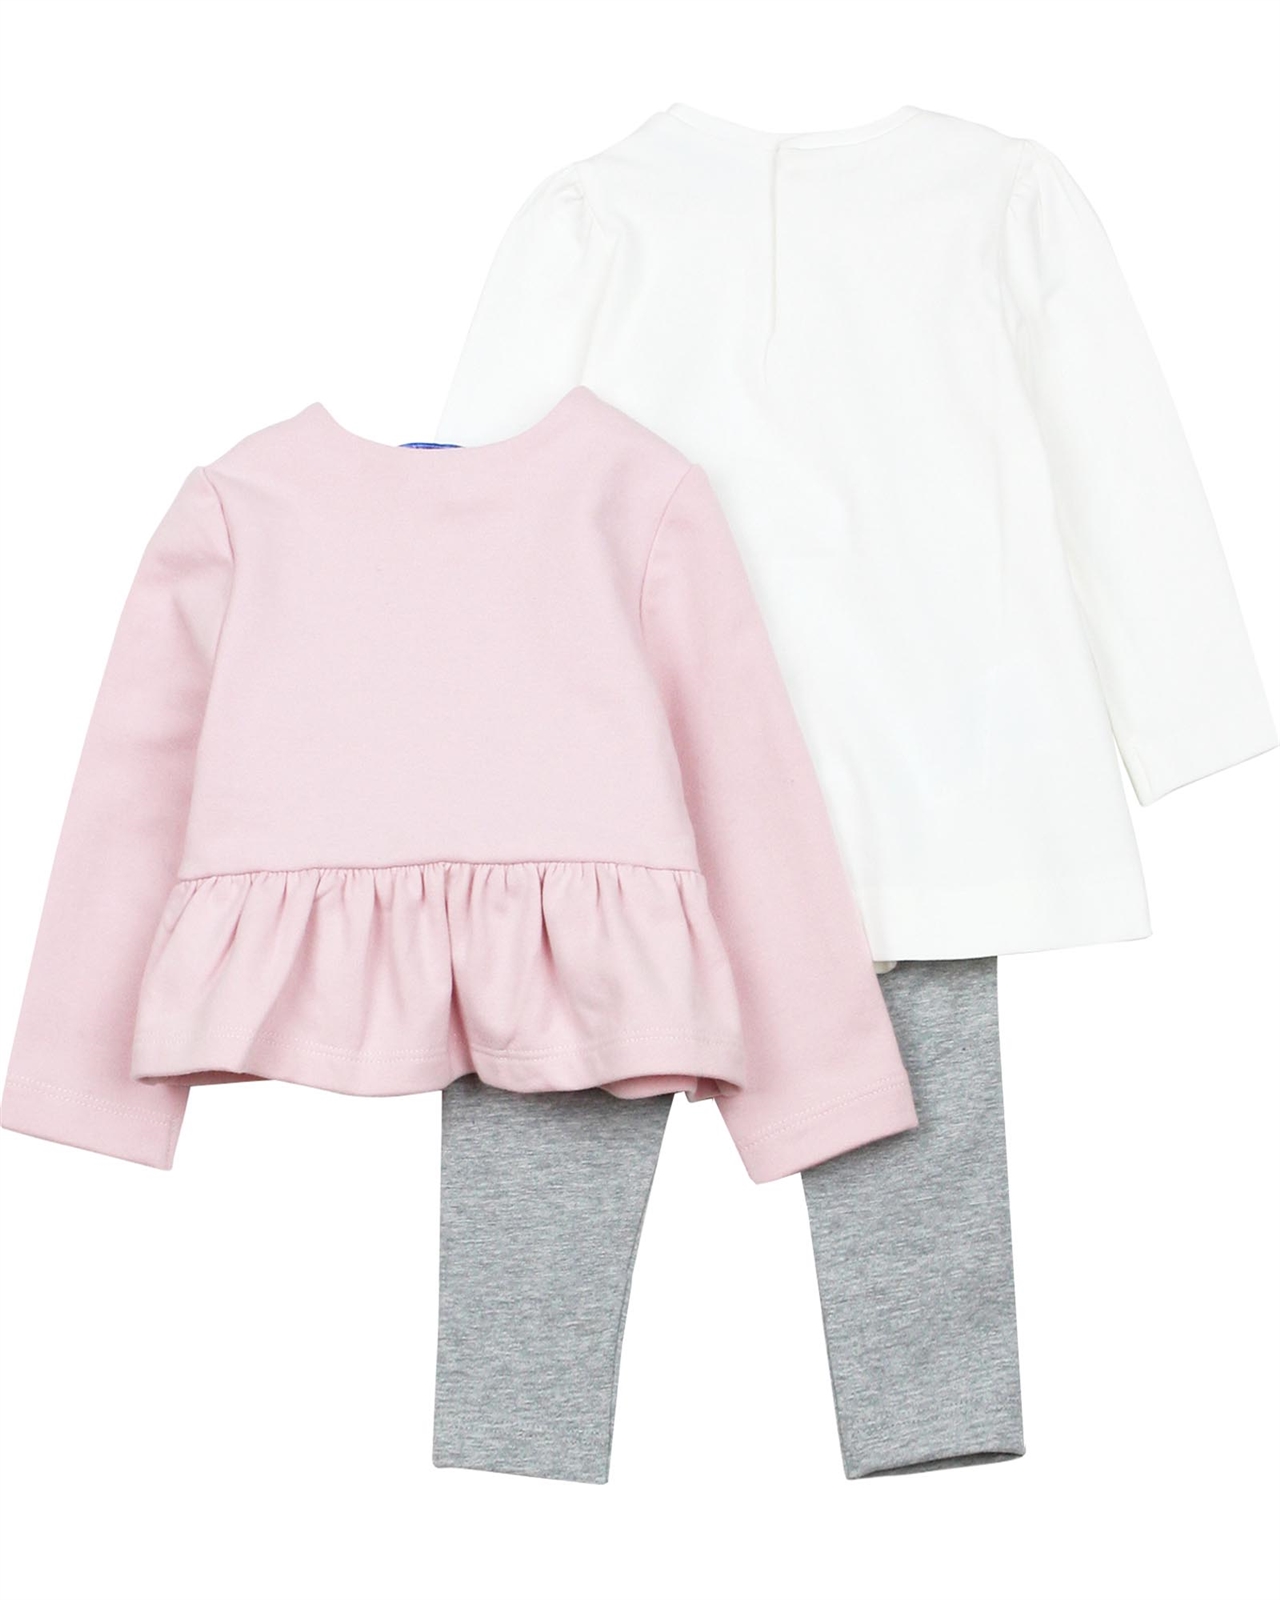 MAYORAL Baby Girl's Terry Cardigan, T-shirt and Leggings Set, Sizes 12M-36M